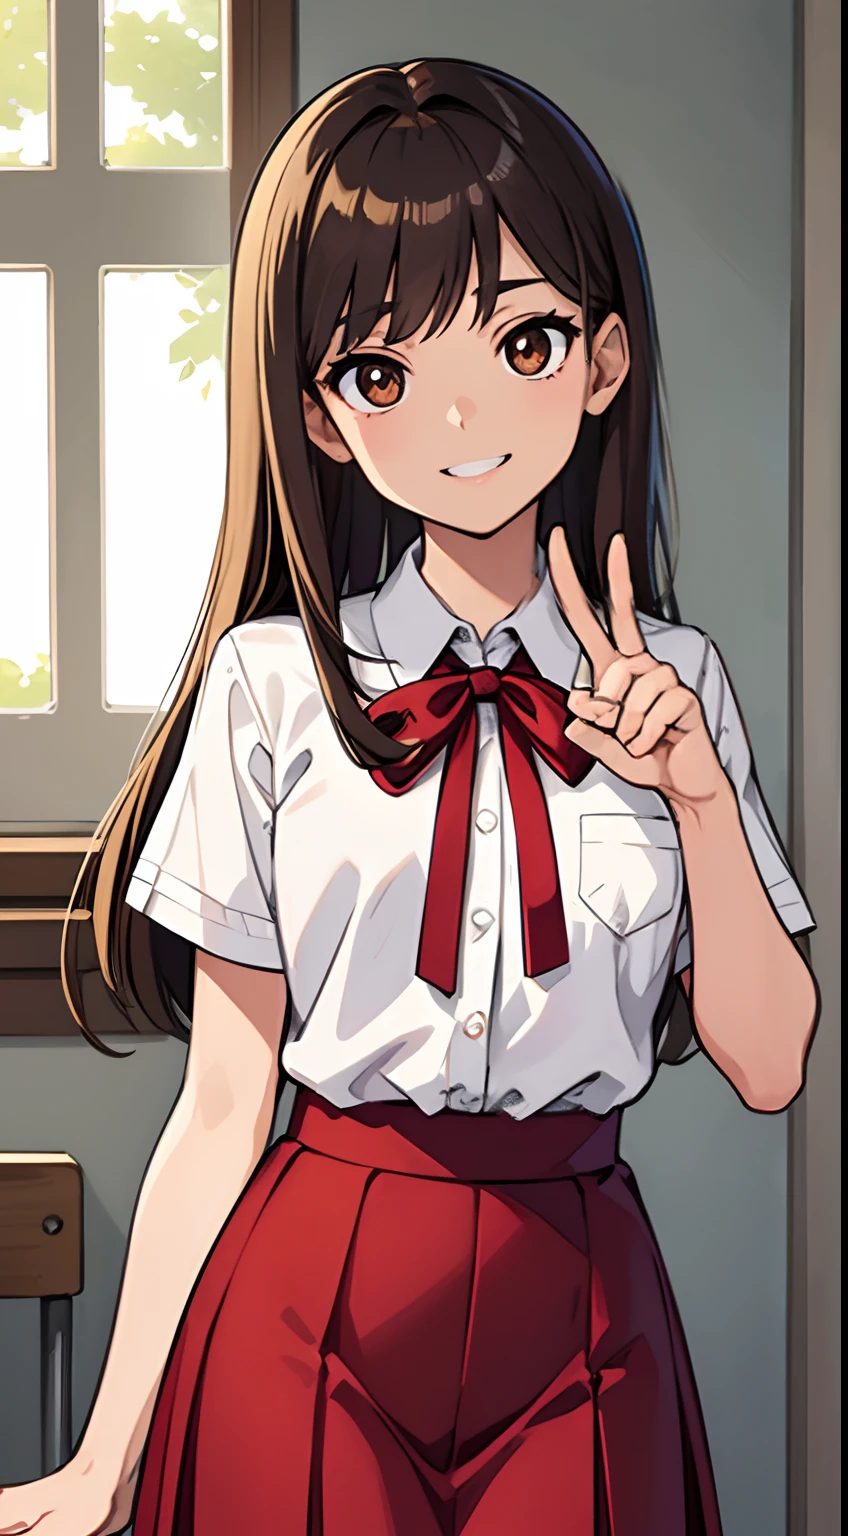 ((Mastepiece, Top Quality)), (Solo), Male, Close-cropped, Distant Look, Big Eyes, Brown Hair, Cocky Look, Flat Chest, Slim Thighs, Smiling, Charming Look, Peace Sign, Dressed in , Bright Red Skirt, White Short-Sleeved Shirt, Blue Ribbon, Tall, High School Student, Soft skin, large dark brown eyes (very fine), evening, school ground, lens flare, fine features, perfect anatomy, centered, perfect distance, very fine, complex, accurate and very fine, rich color, rich colors, accurate, clean, clean, rich colors, accurate, clean clean, rich color, exquisite detail, golden ratio illustration